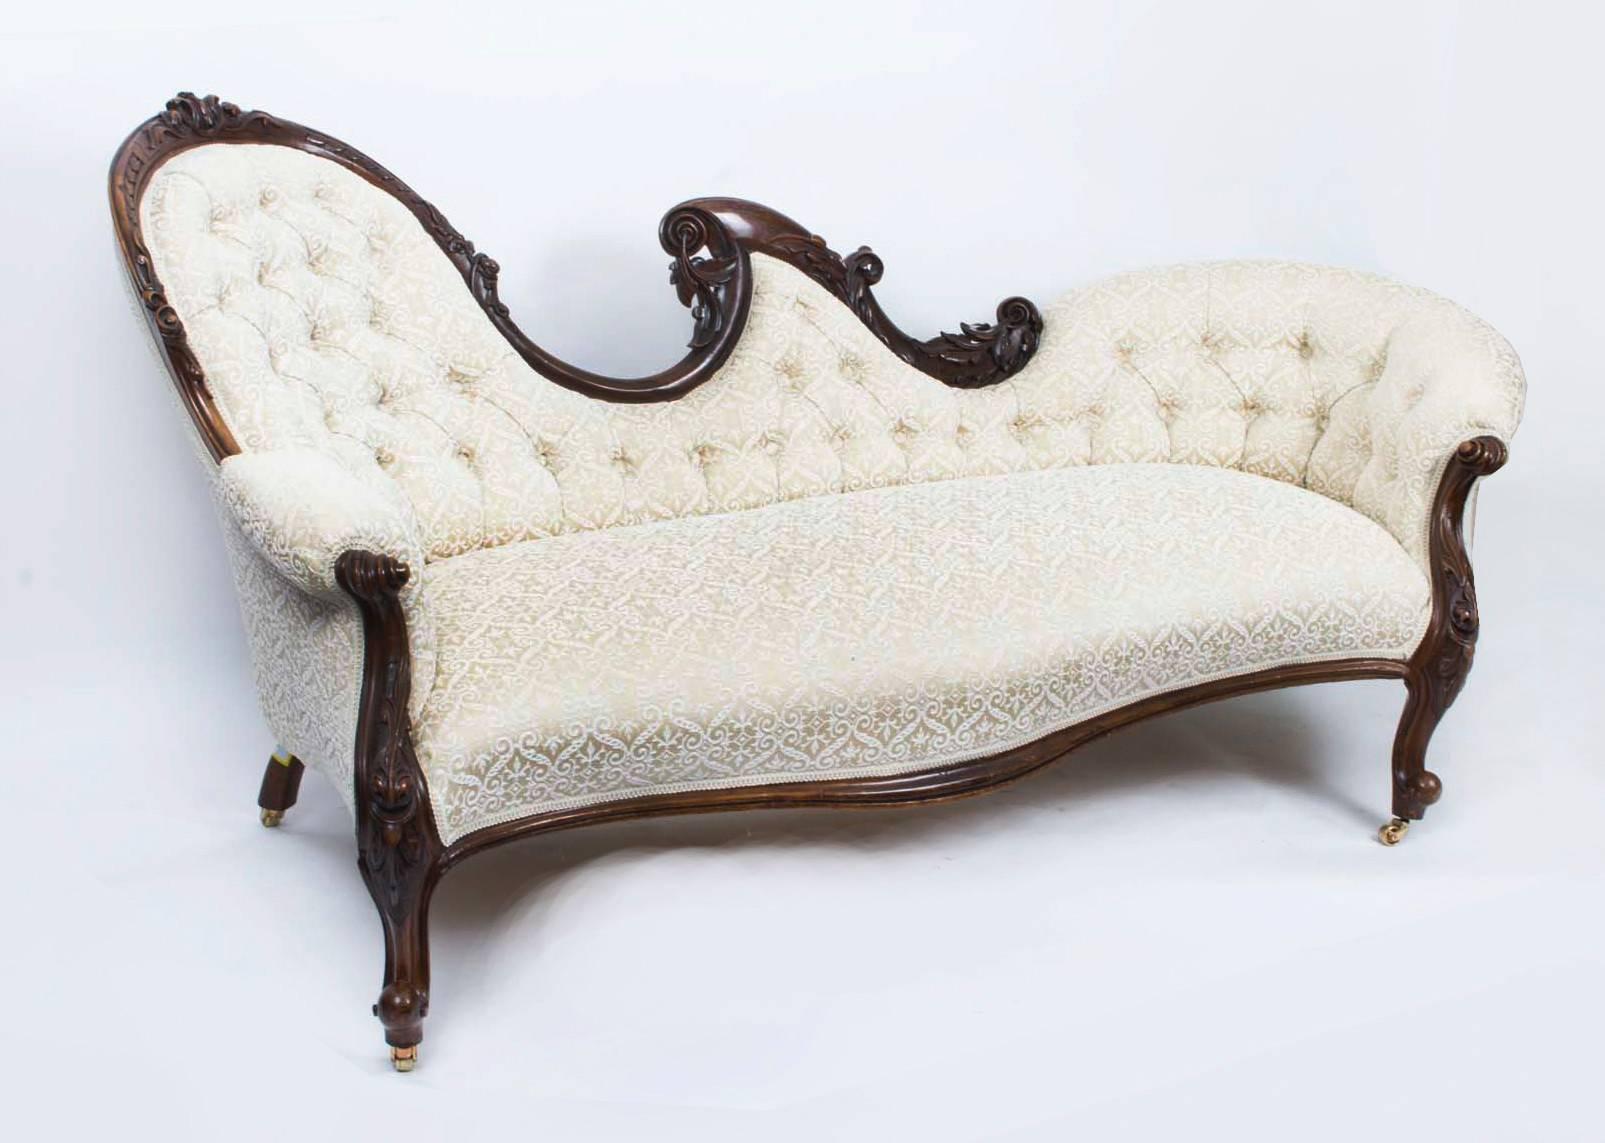 This is a fantastic pair of near identical English antique Victorian carved mahogany chaise longues facing opposite ends, circa 1870 in date. 

They are made from solid mahogany and stand on elegant carved cabriole legs which terminate in the